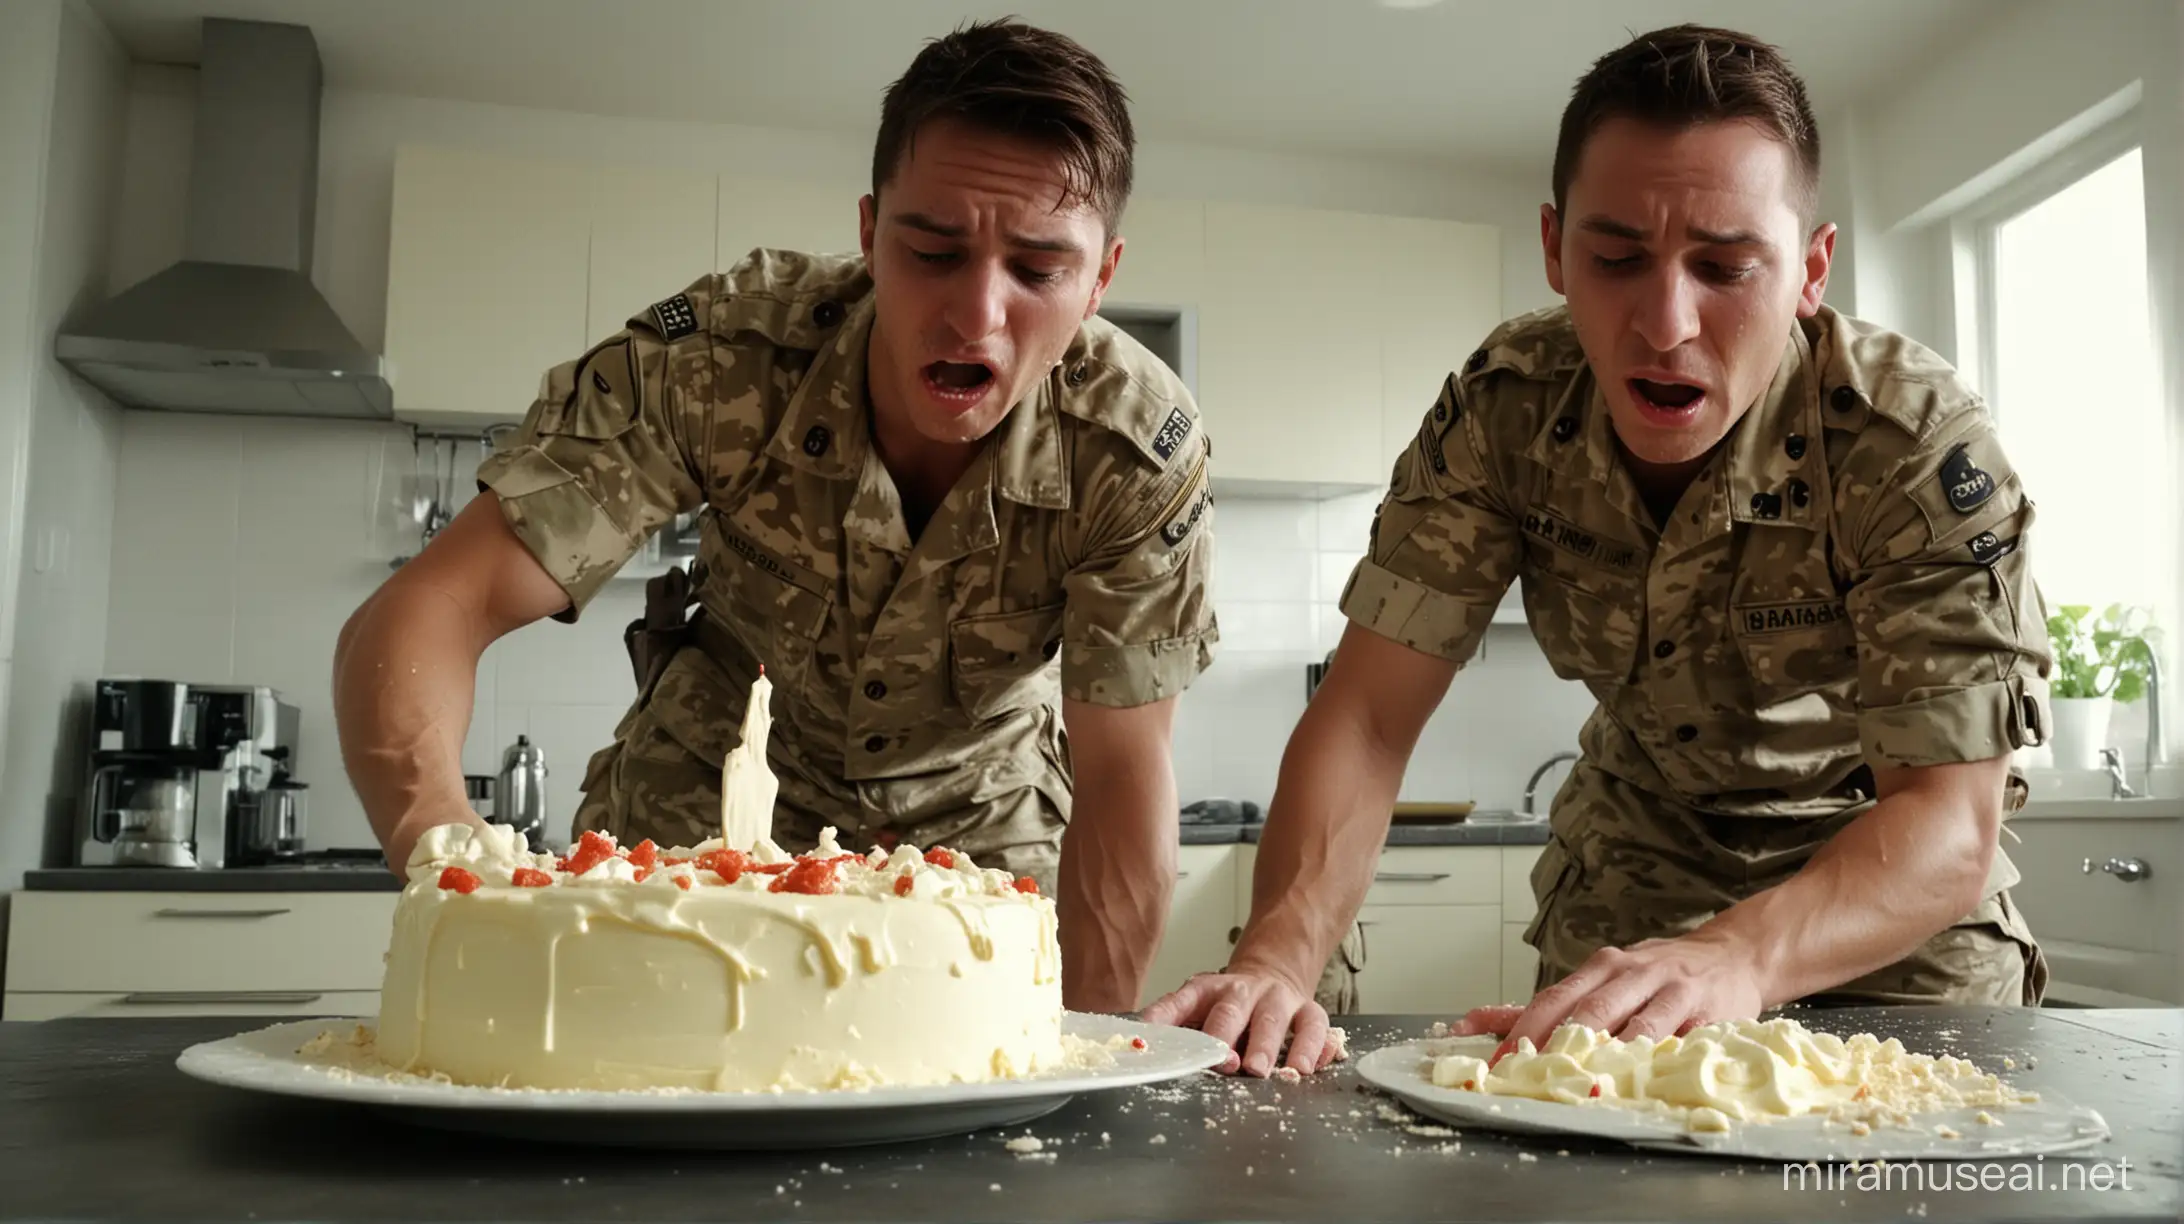 Soldiers Engage in Violent Cake Fight Testicle Squeeze and Face Smashing